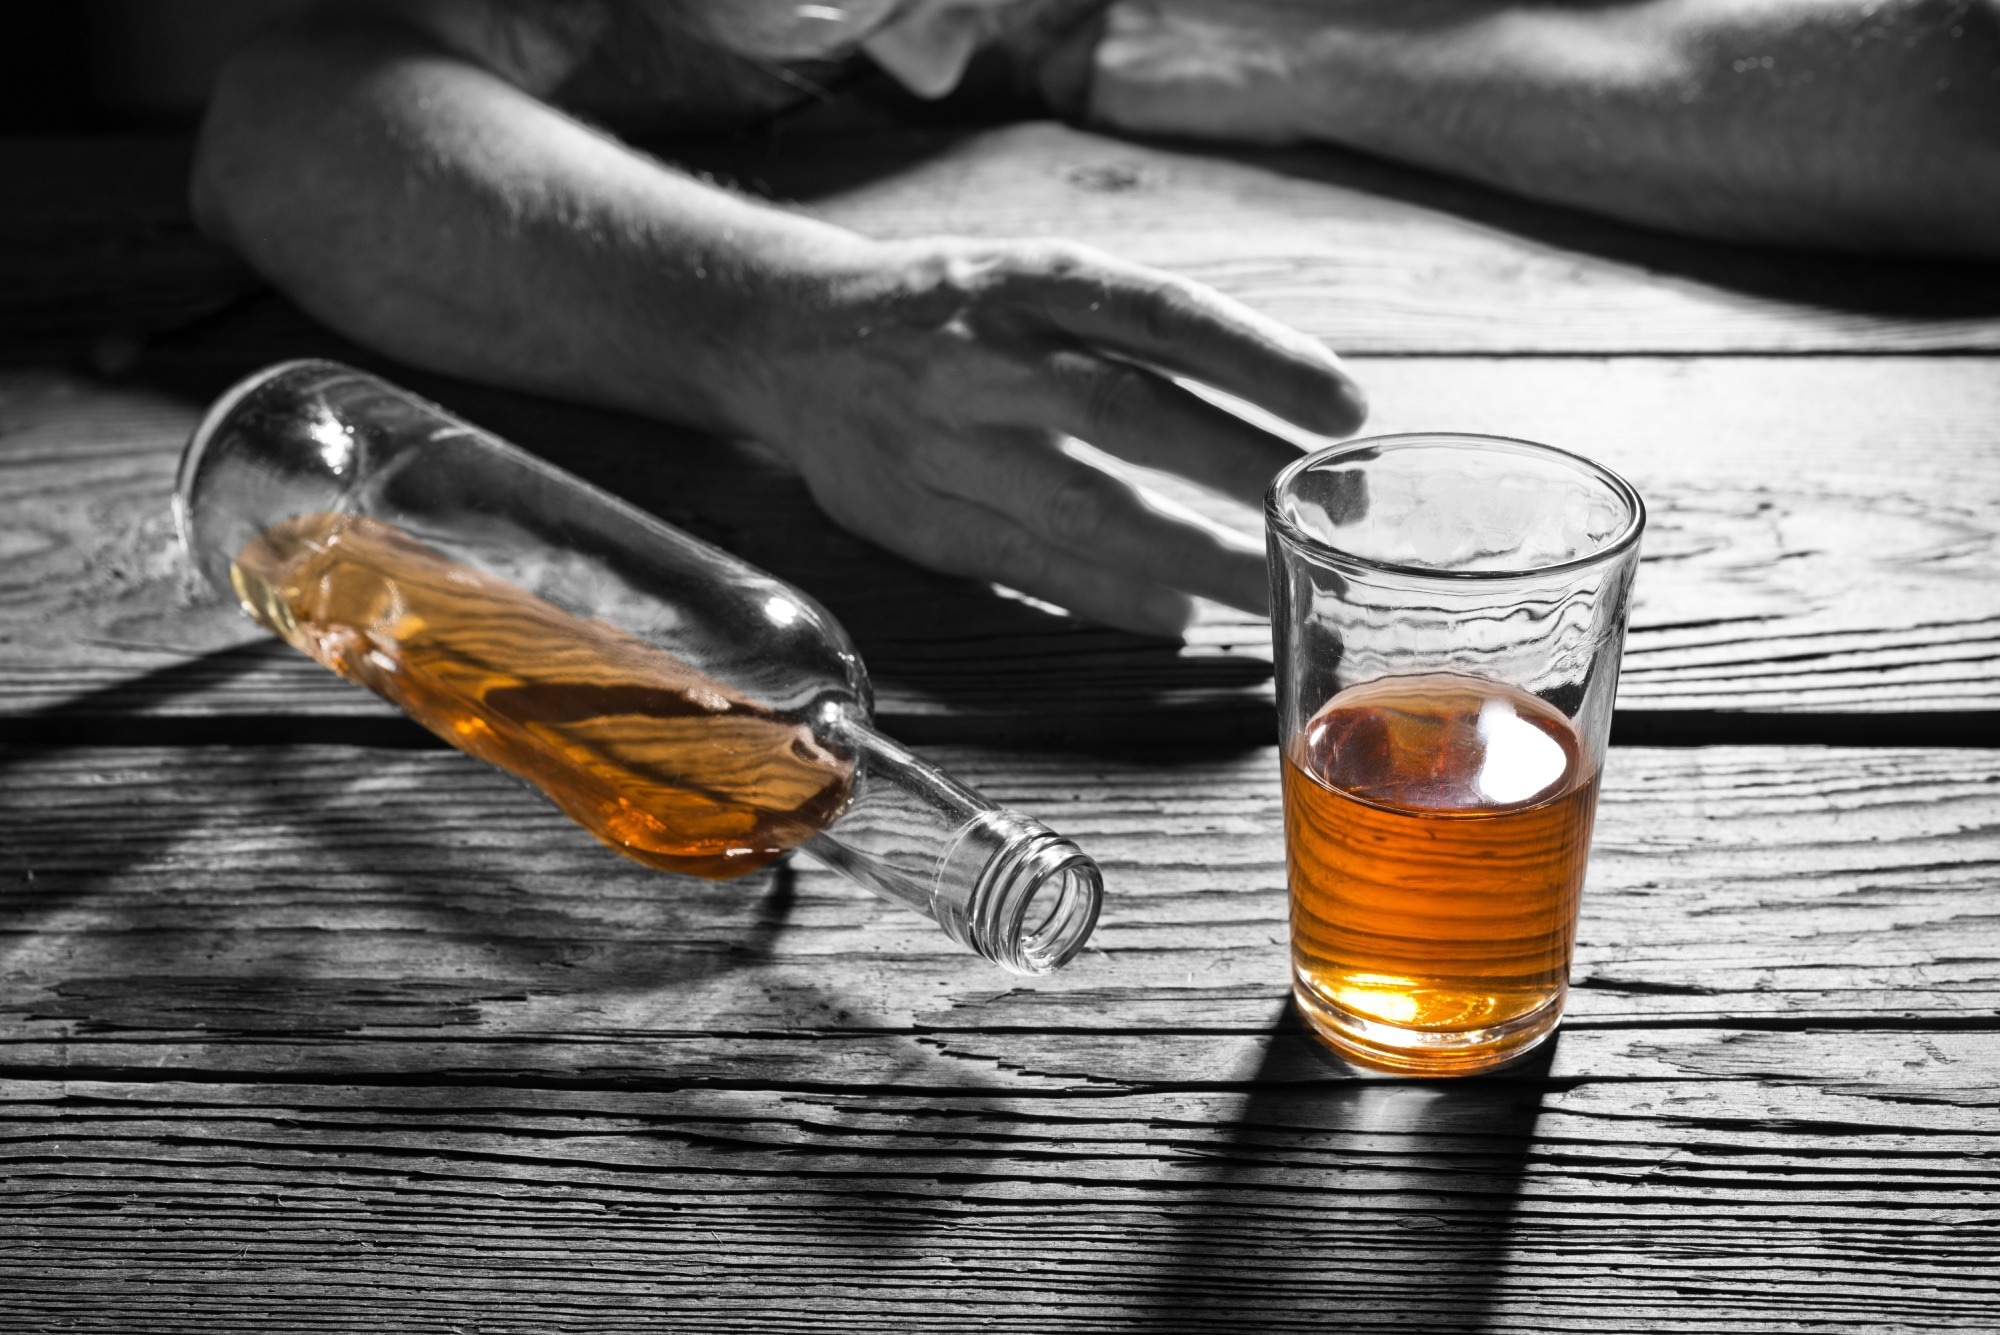 Study: Reduced Alcohol Consumption and Major Adverse Cardiovascular Events Among Individuals With Previously High Alcohol Consumption. Image Credit: Vaclav Mach / Shutterstock